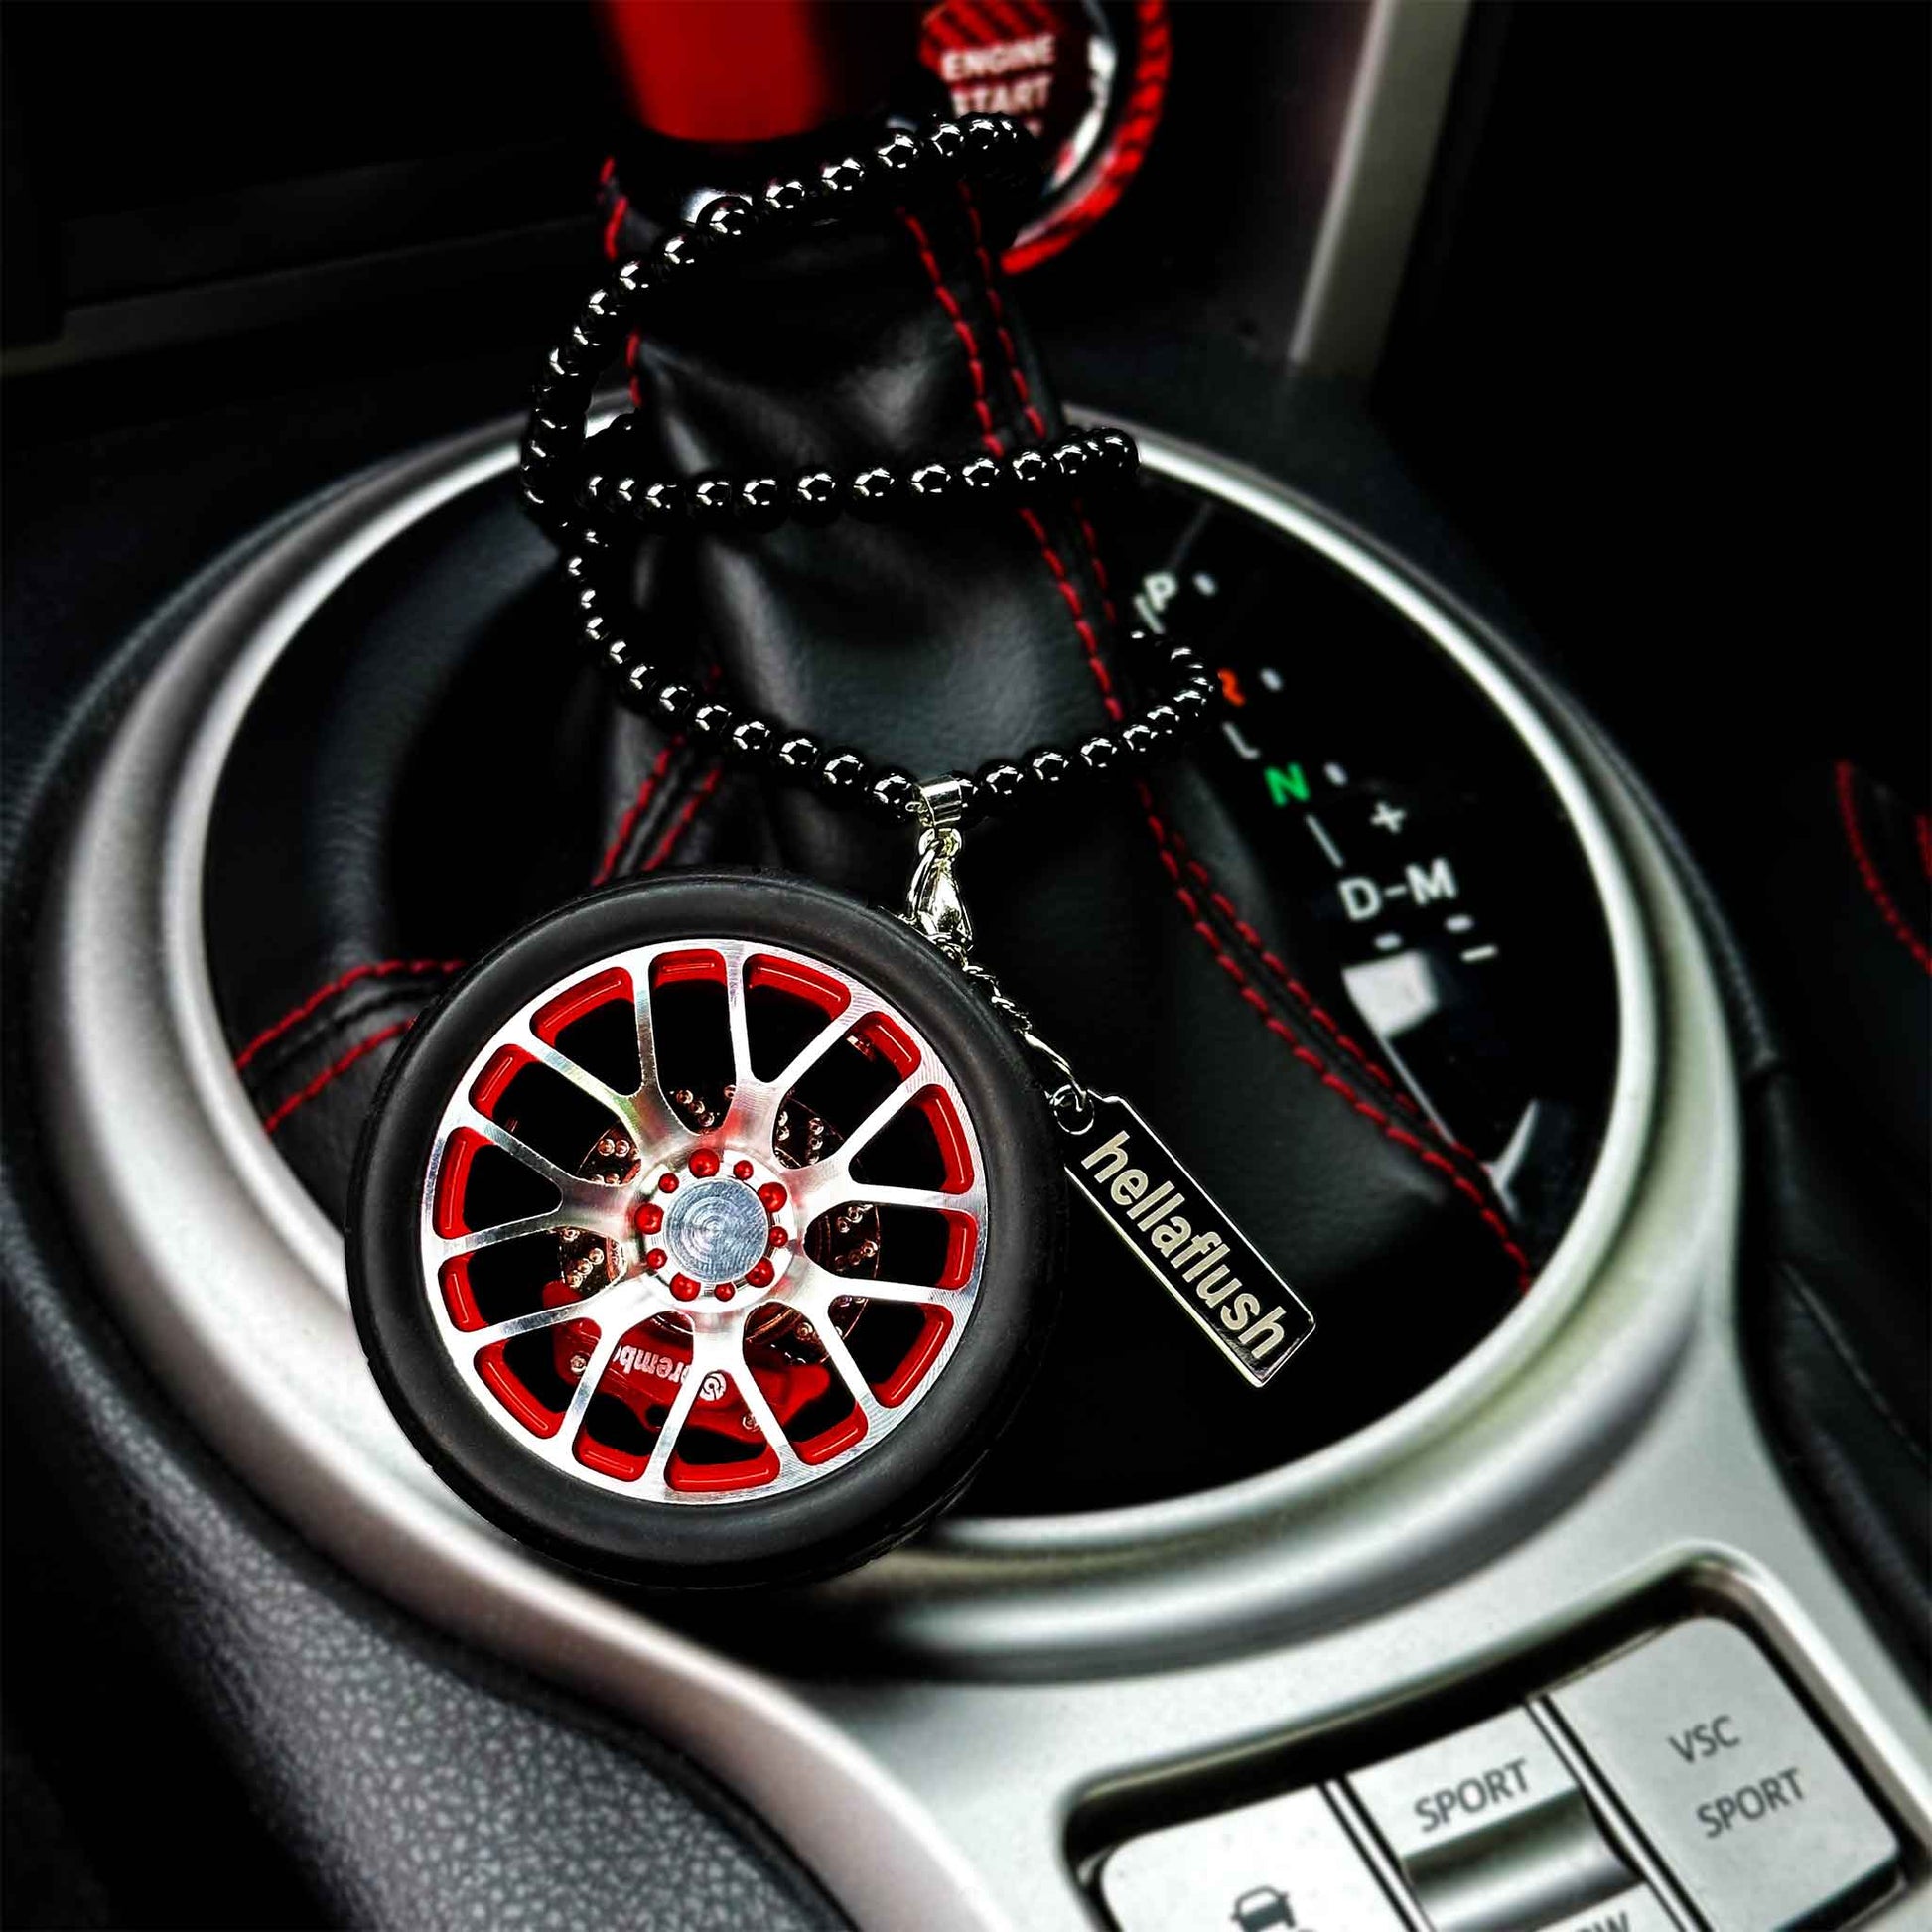 A red BBS wheel air-freshener with its beads twining around an auto car's the shift boot